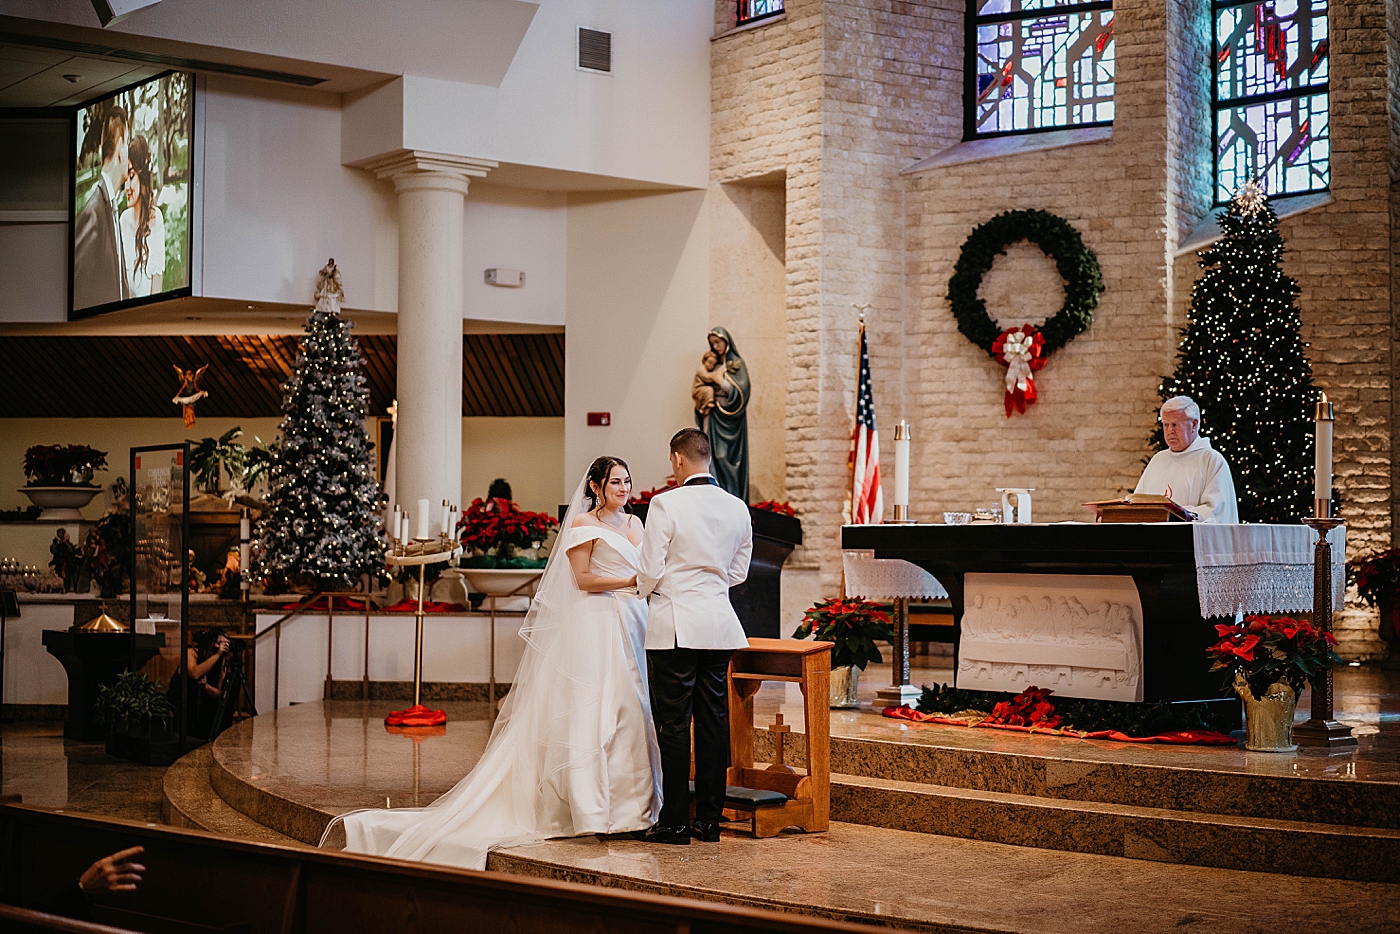 Bride and Groom holding hands at Ceremony with Christmas Decor Lavan Venue Wedding Photography captured by South Florida Wedding Photographer Krystal Capone Photography